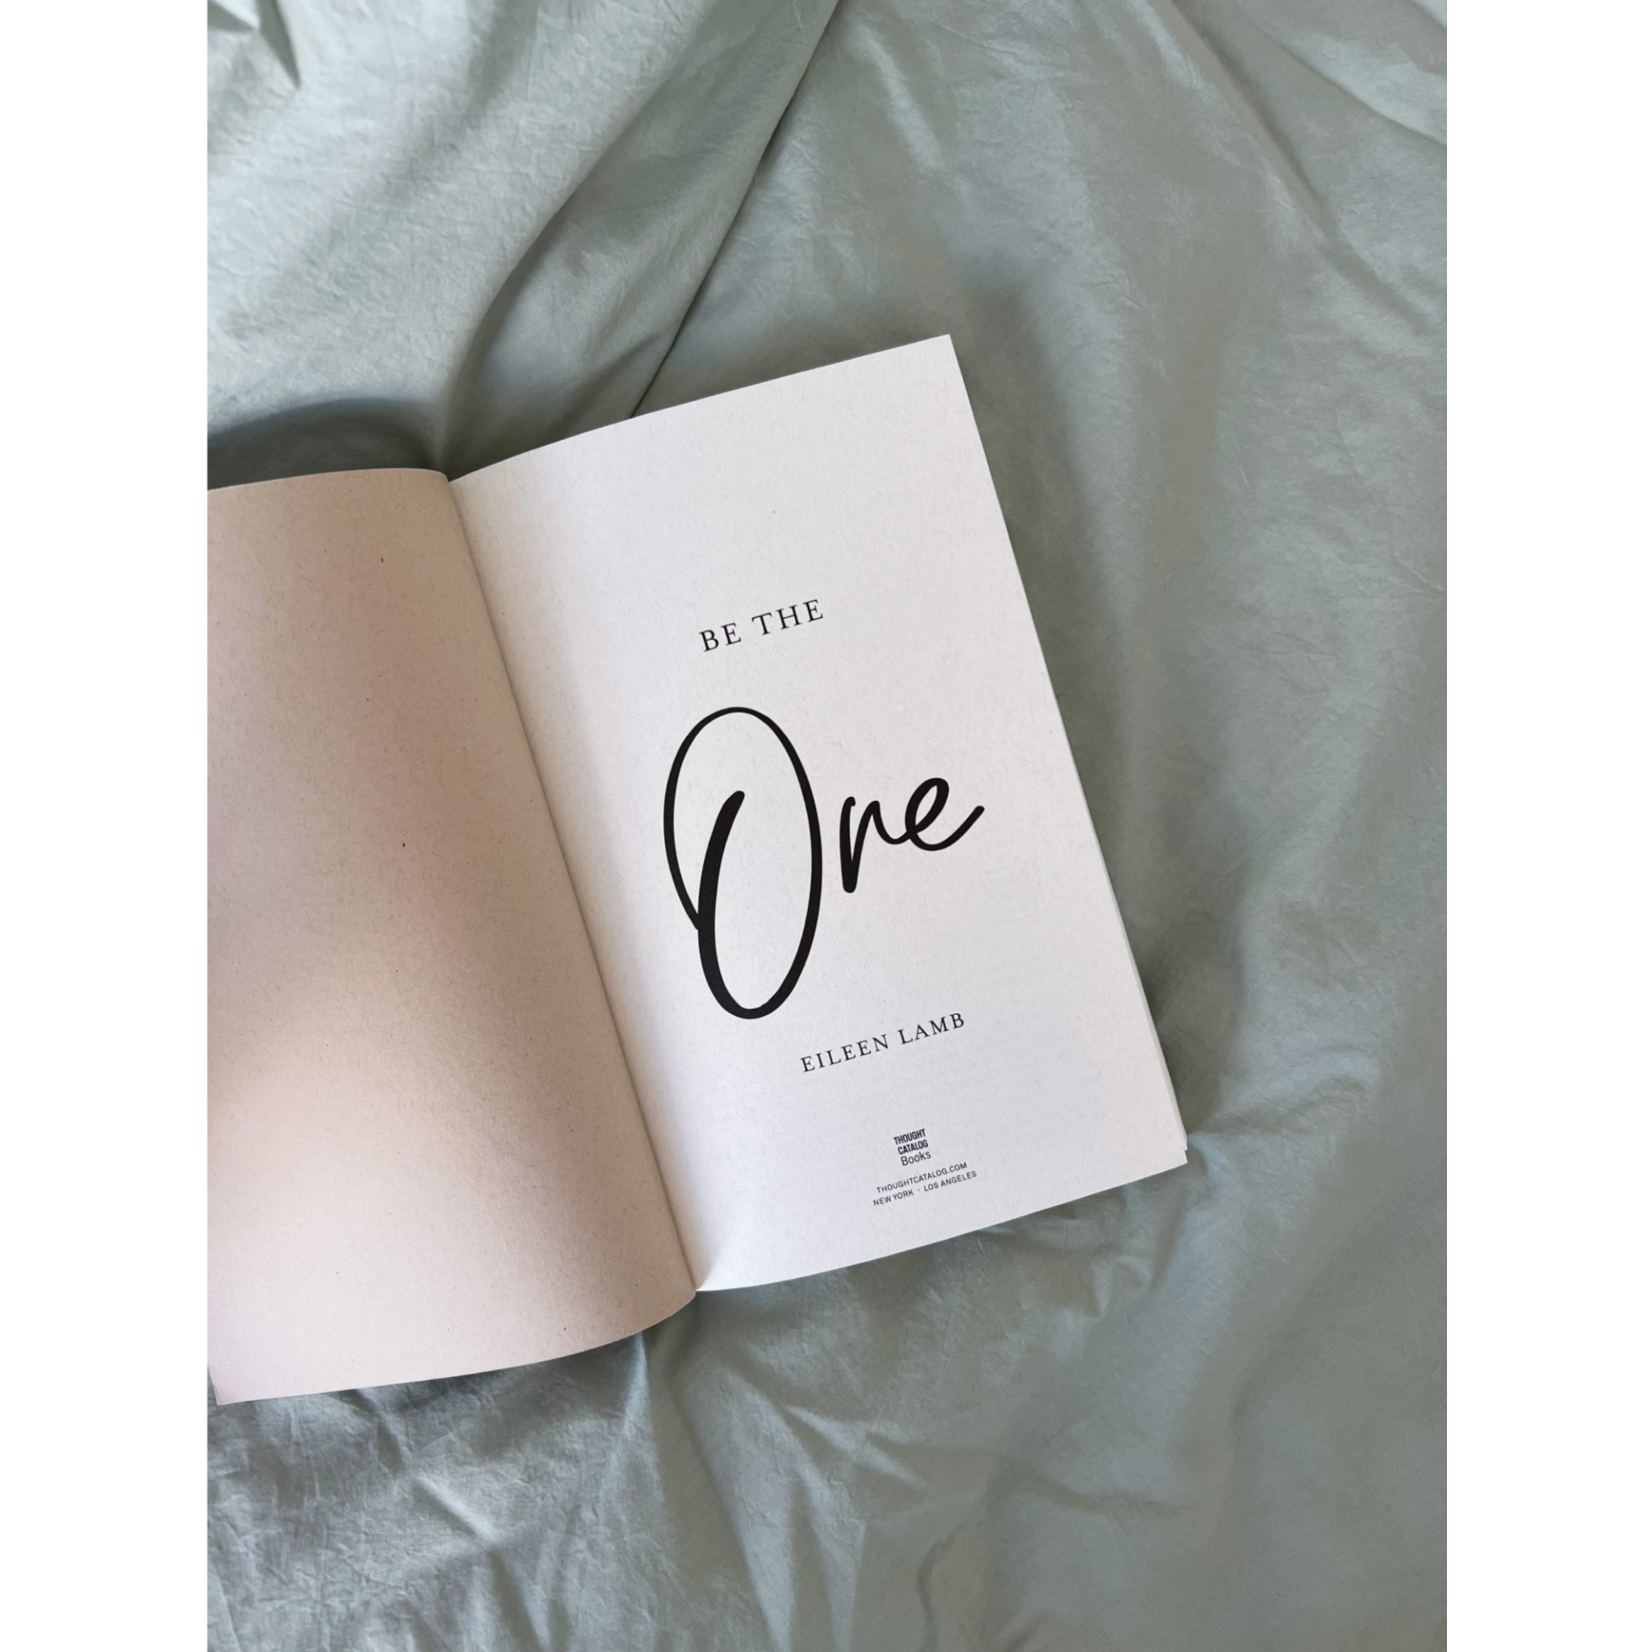 Be The One by Eileen Lamb